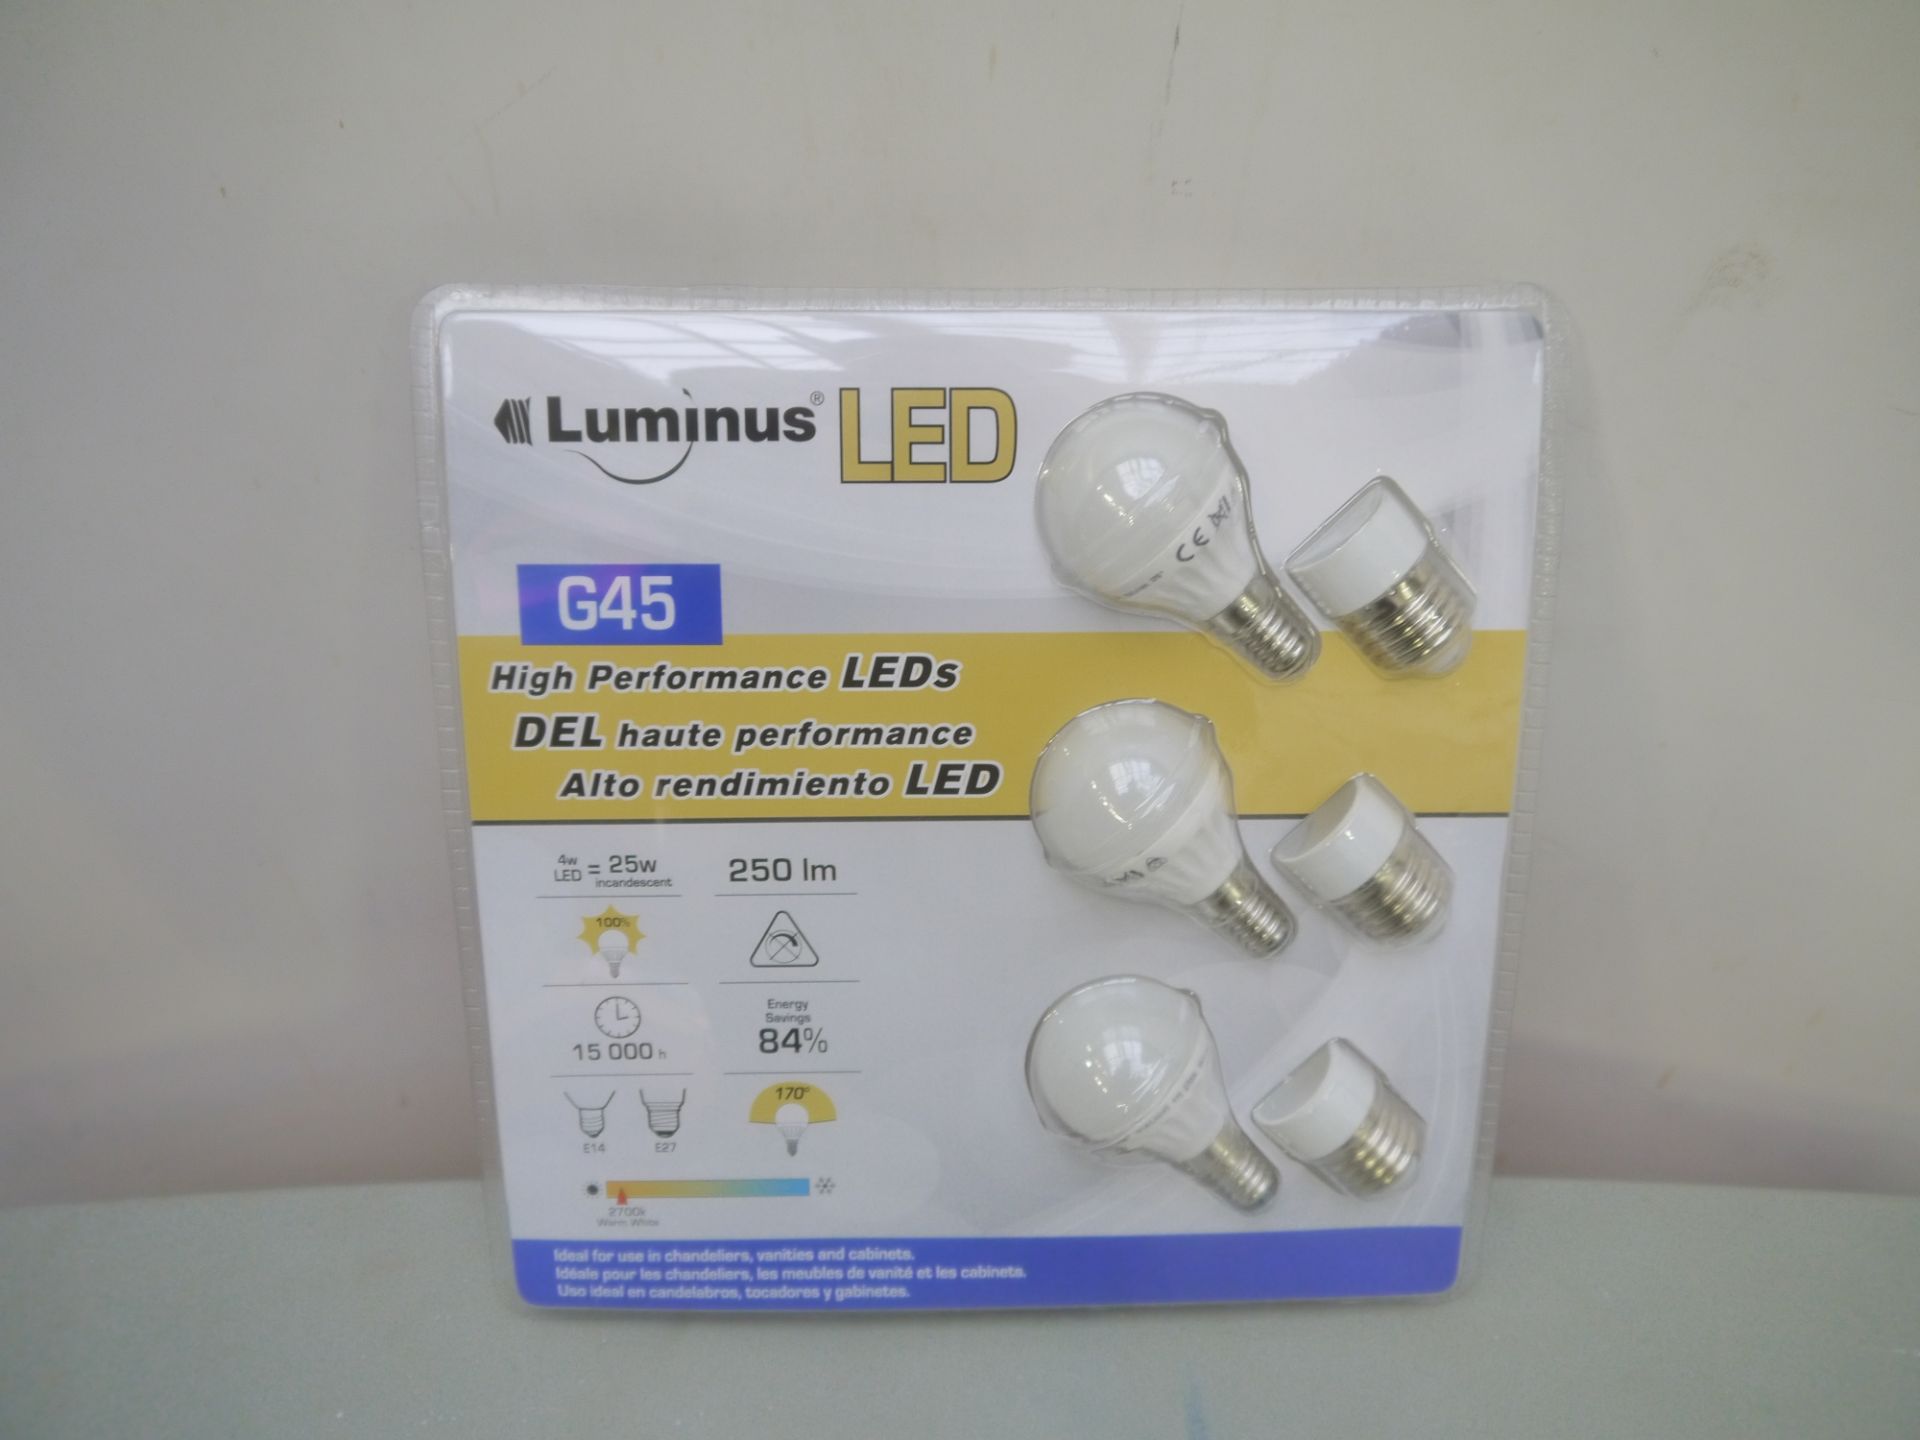 Pack of 3 Luminus LED high performance G45 4w LED = 25w . In Original Packaging.